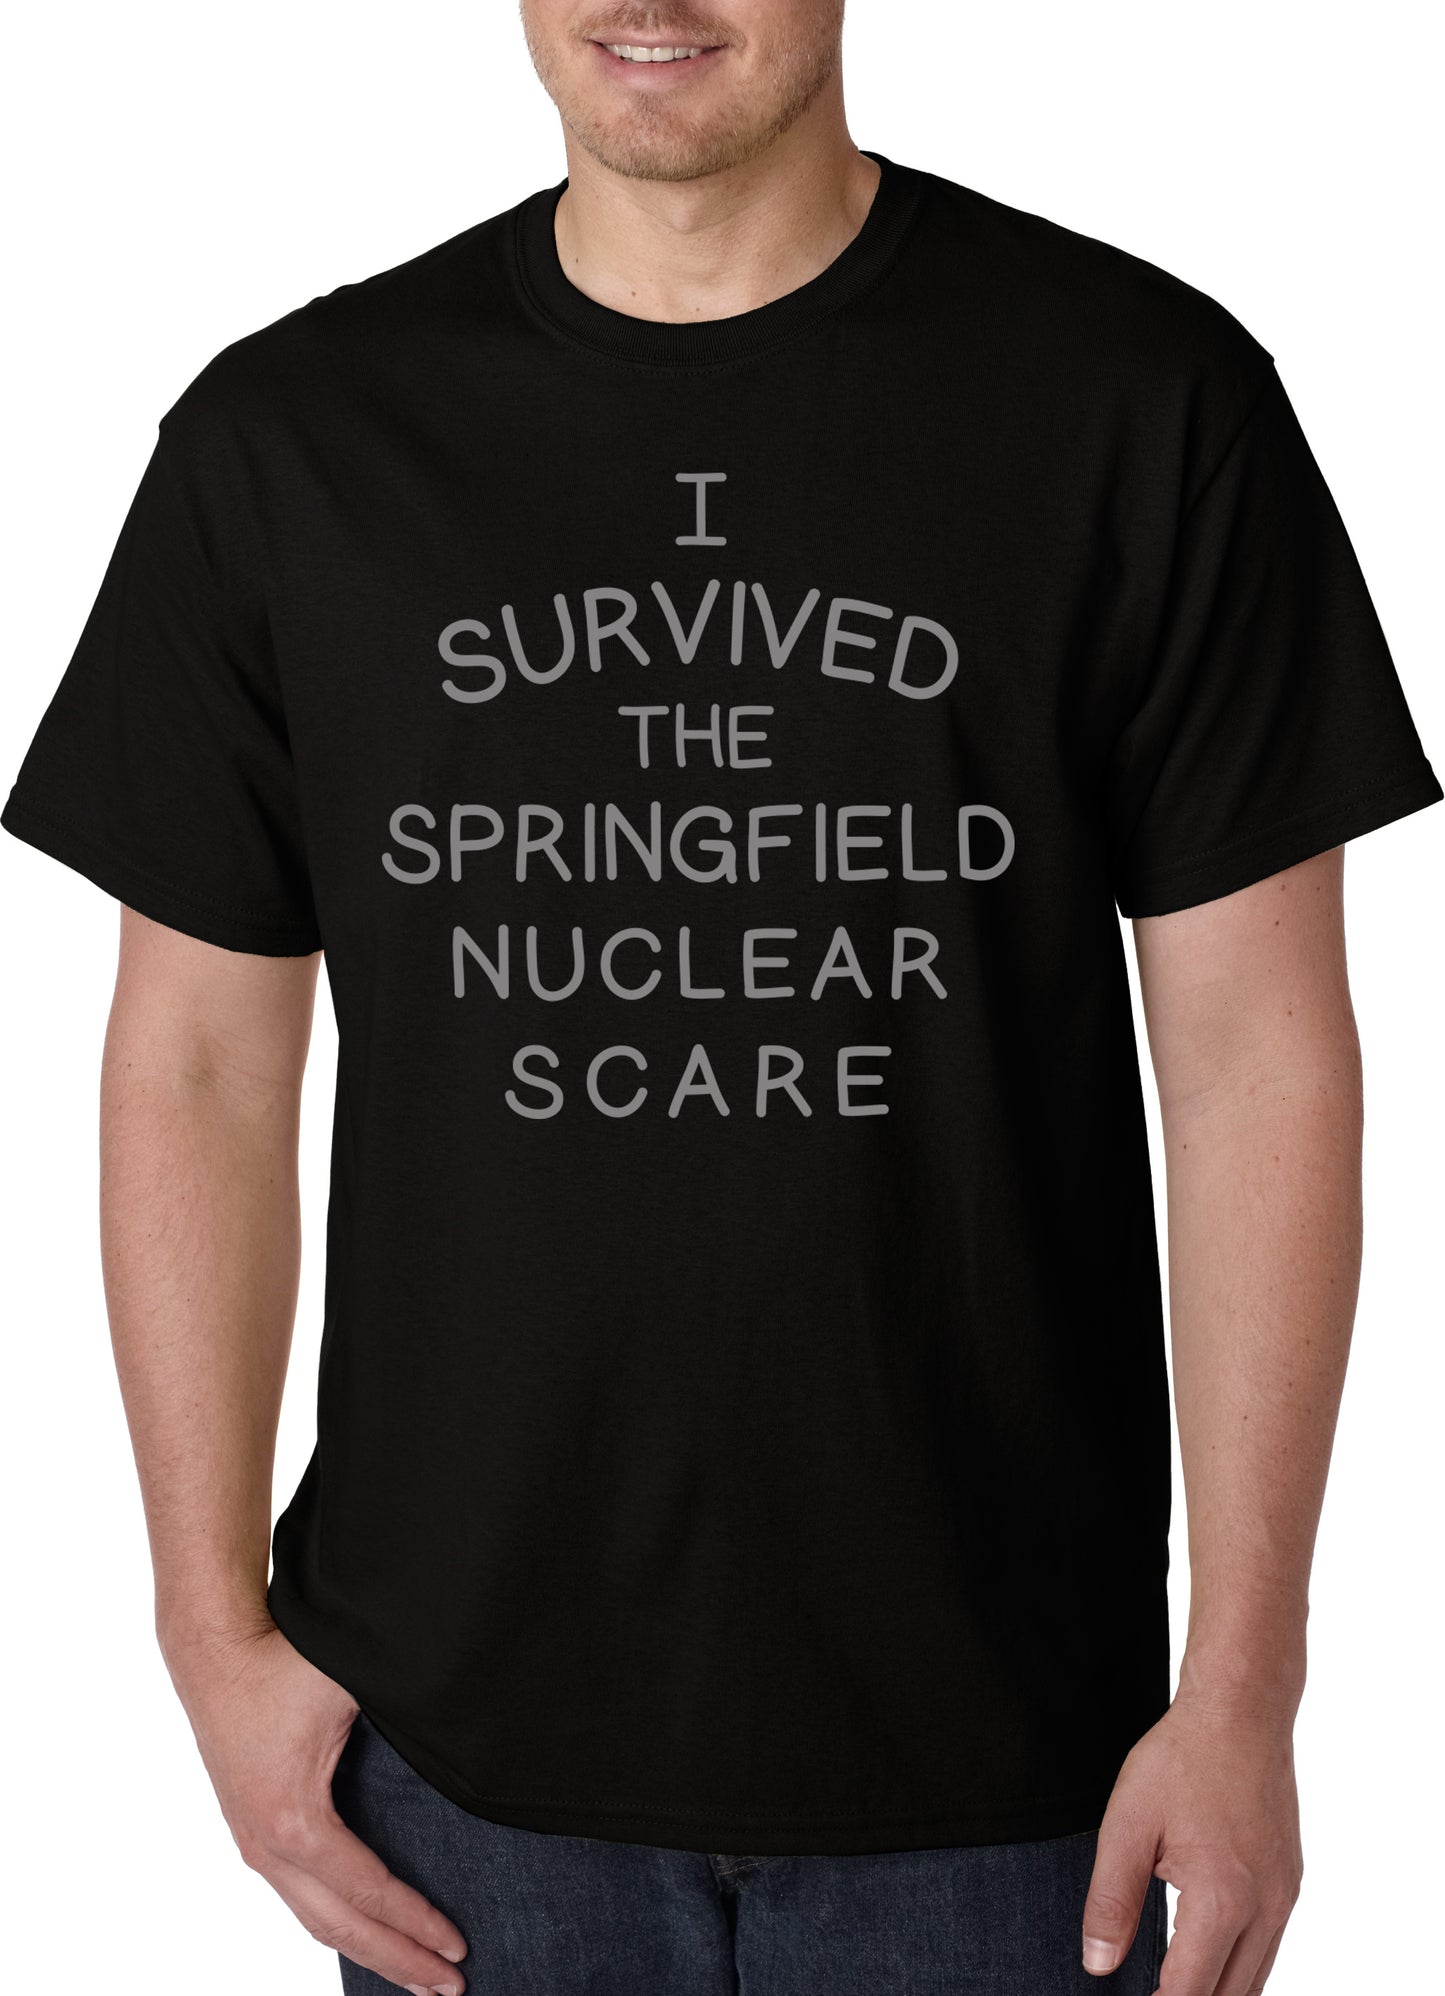 I Survived The Springfield Nuclear Scare t-shirt